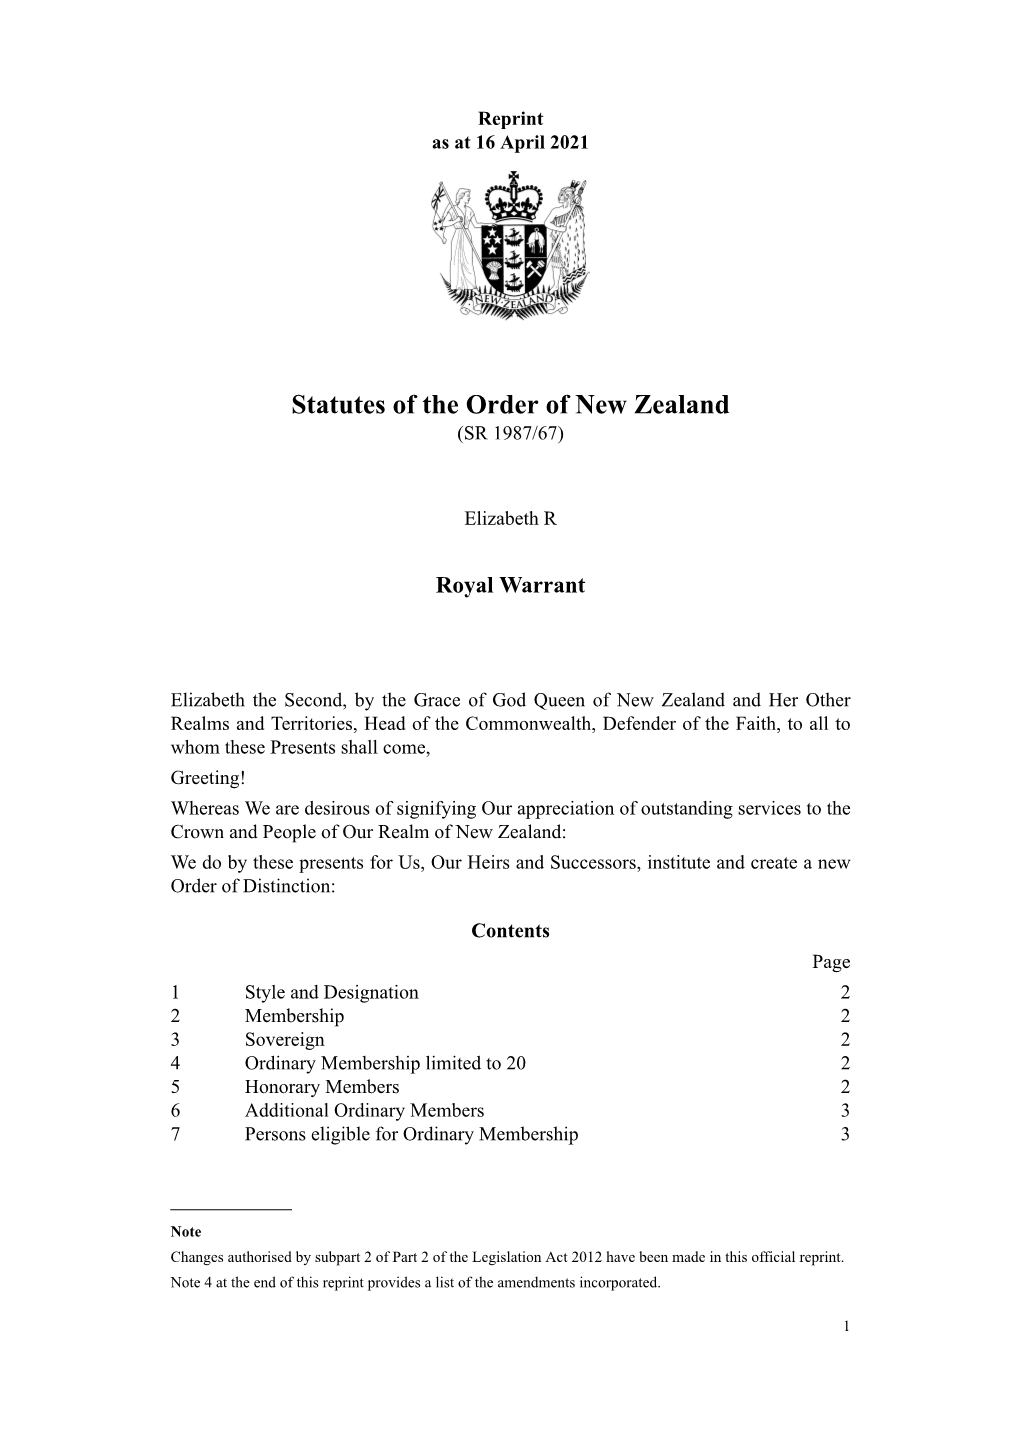 Statutes of the Order of New Zealand (SR 1987/67)